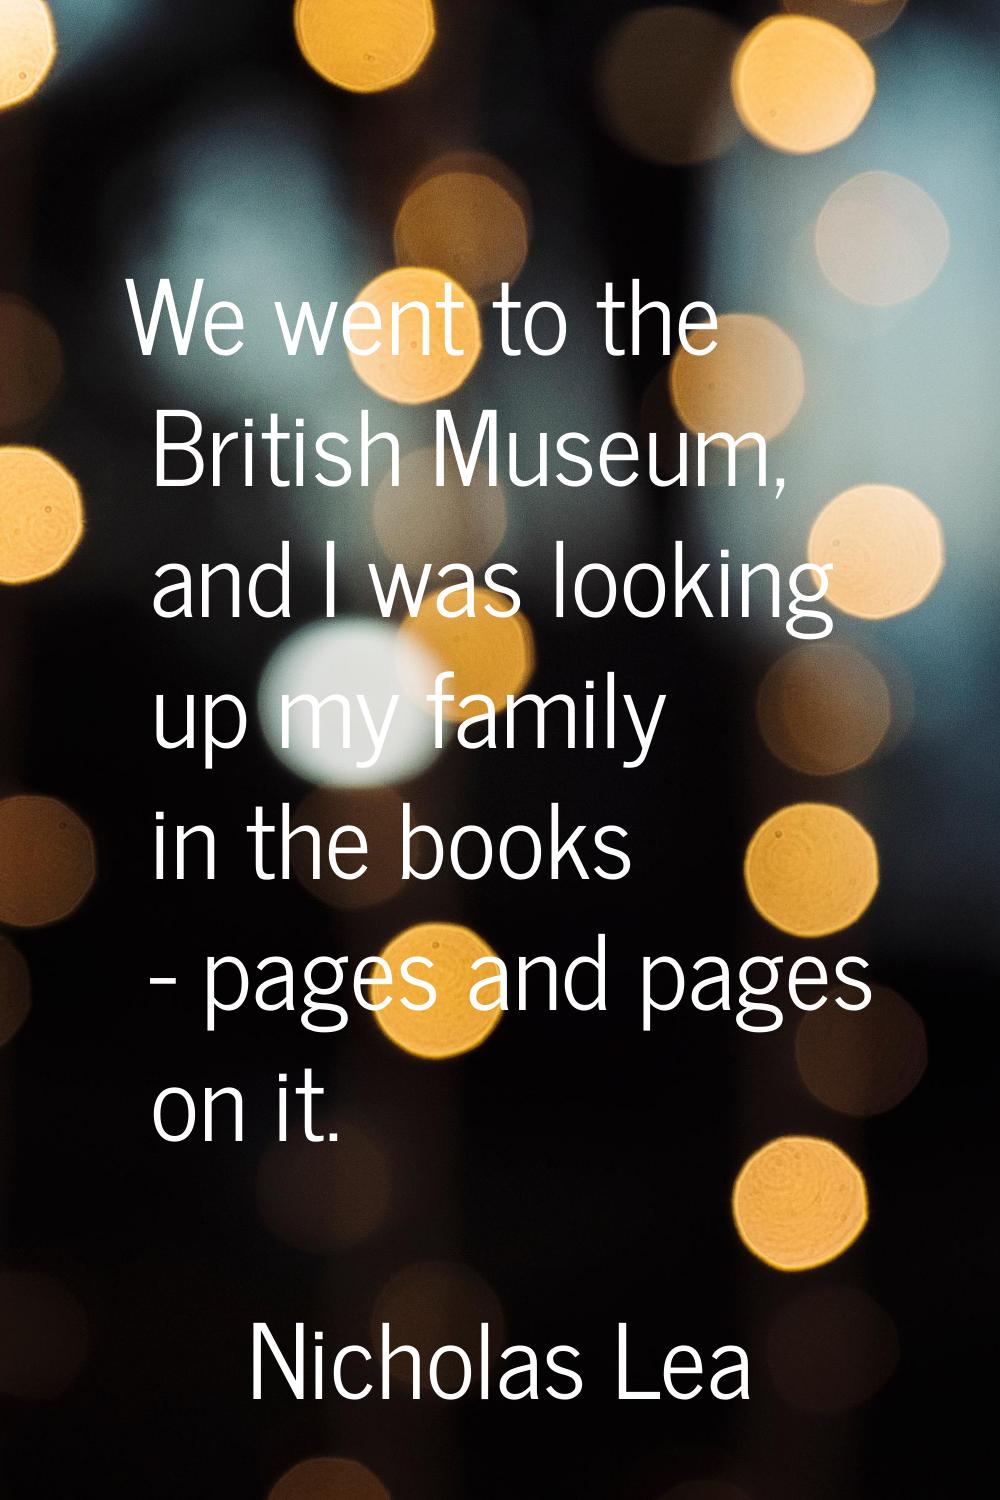 We went to the British Museum, and I was looking up my family in the books - pages and pages on it.